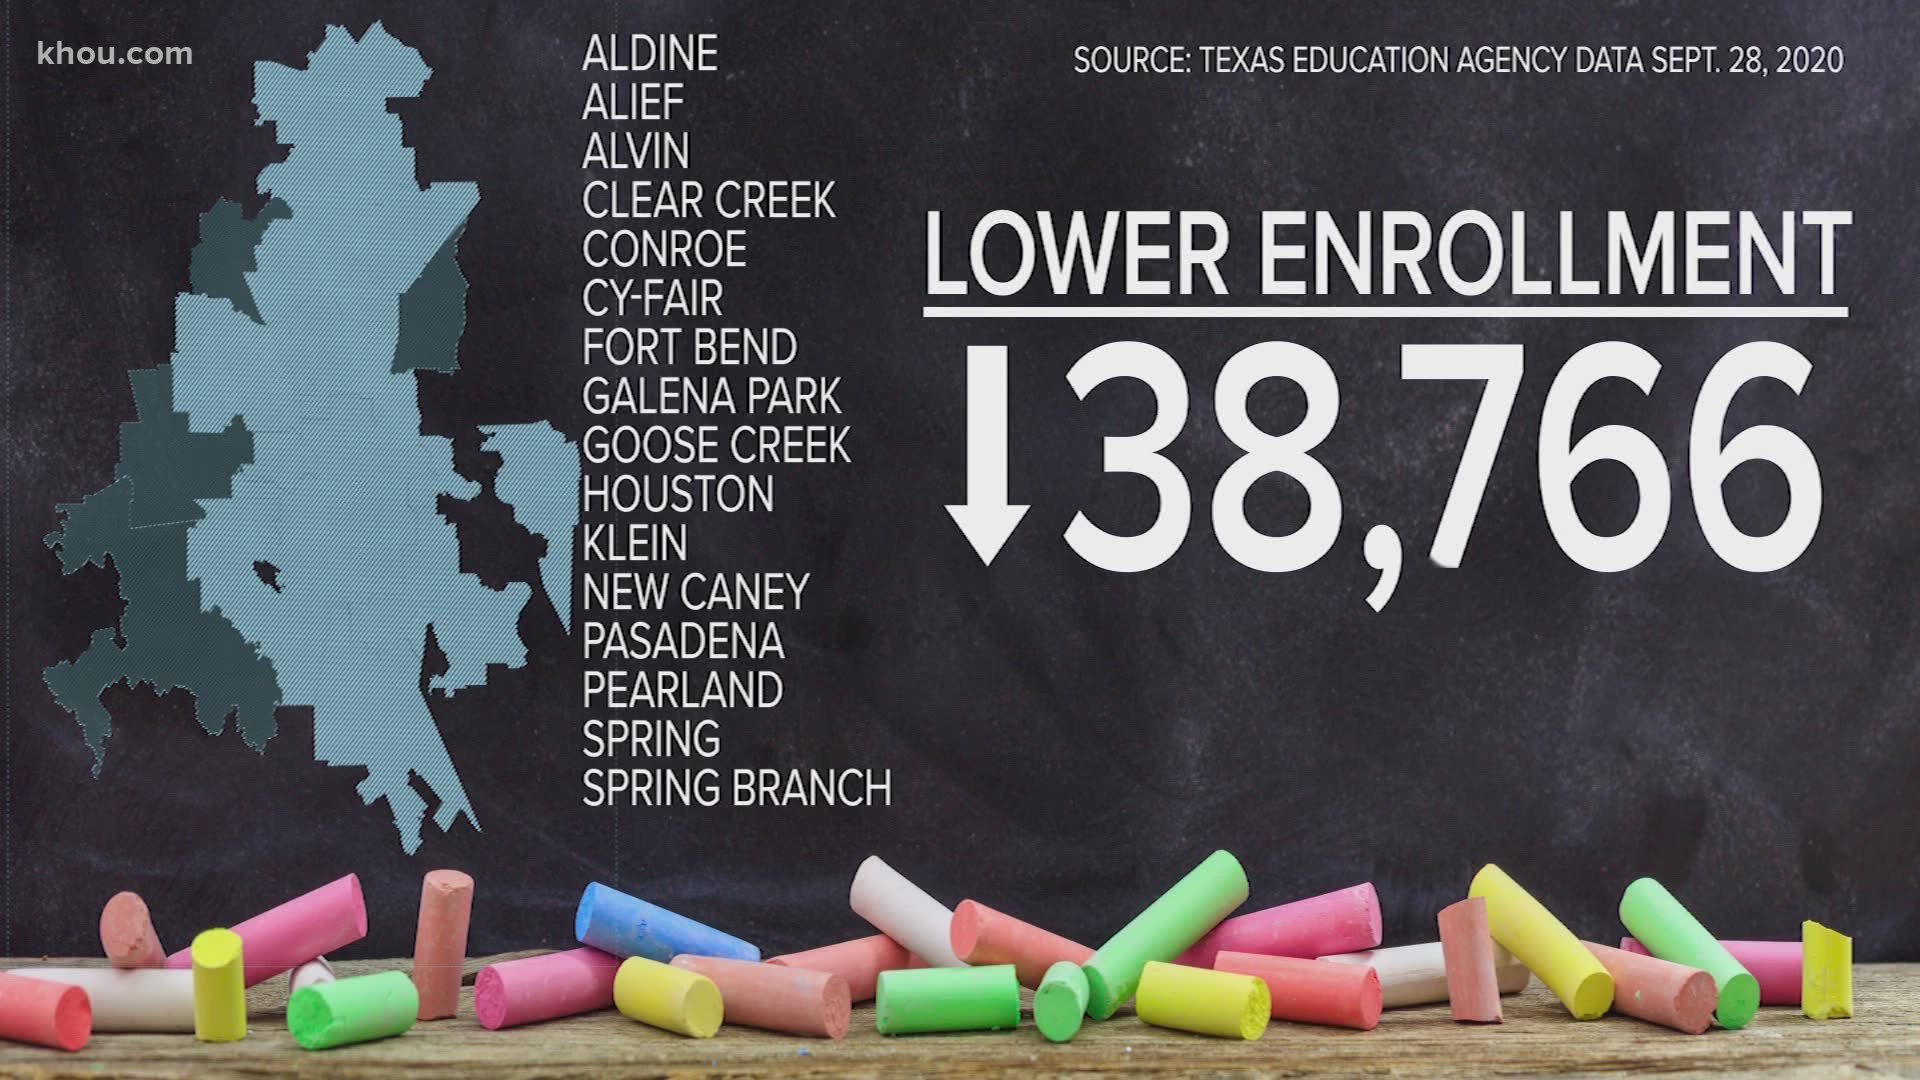 Many Houston-area school districts are facing significant declines in enrollment as the COVID-19 pandemic continues to disrupt public education like never before.